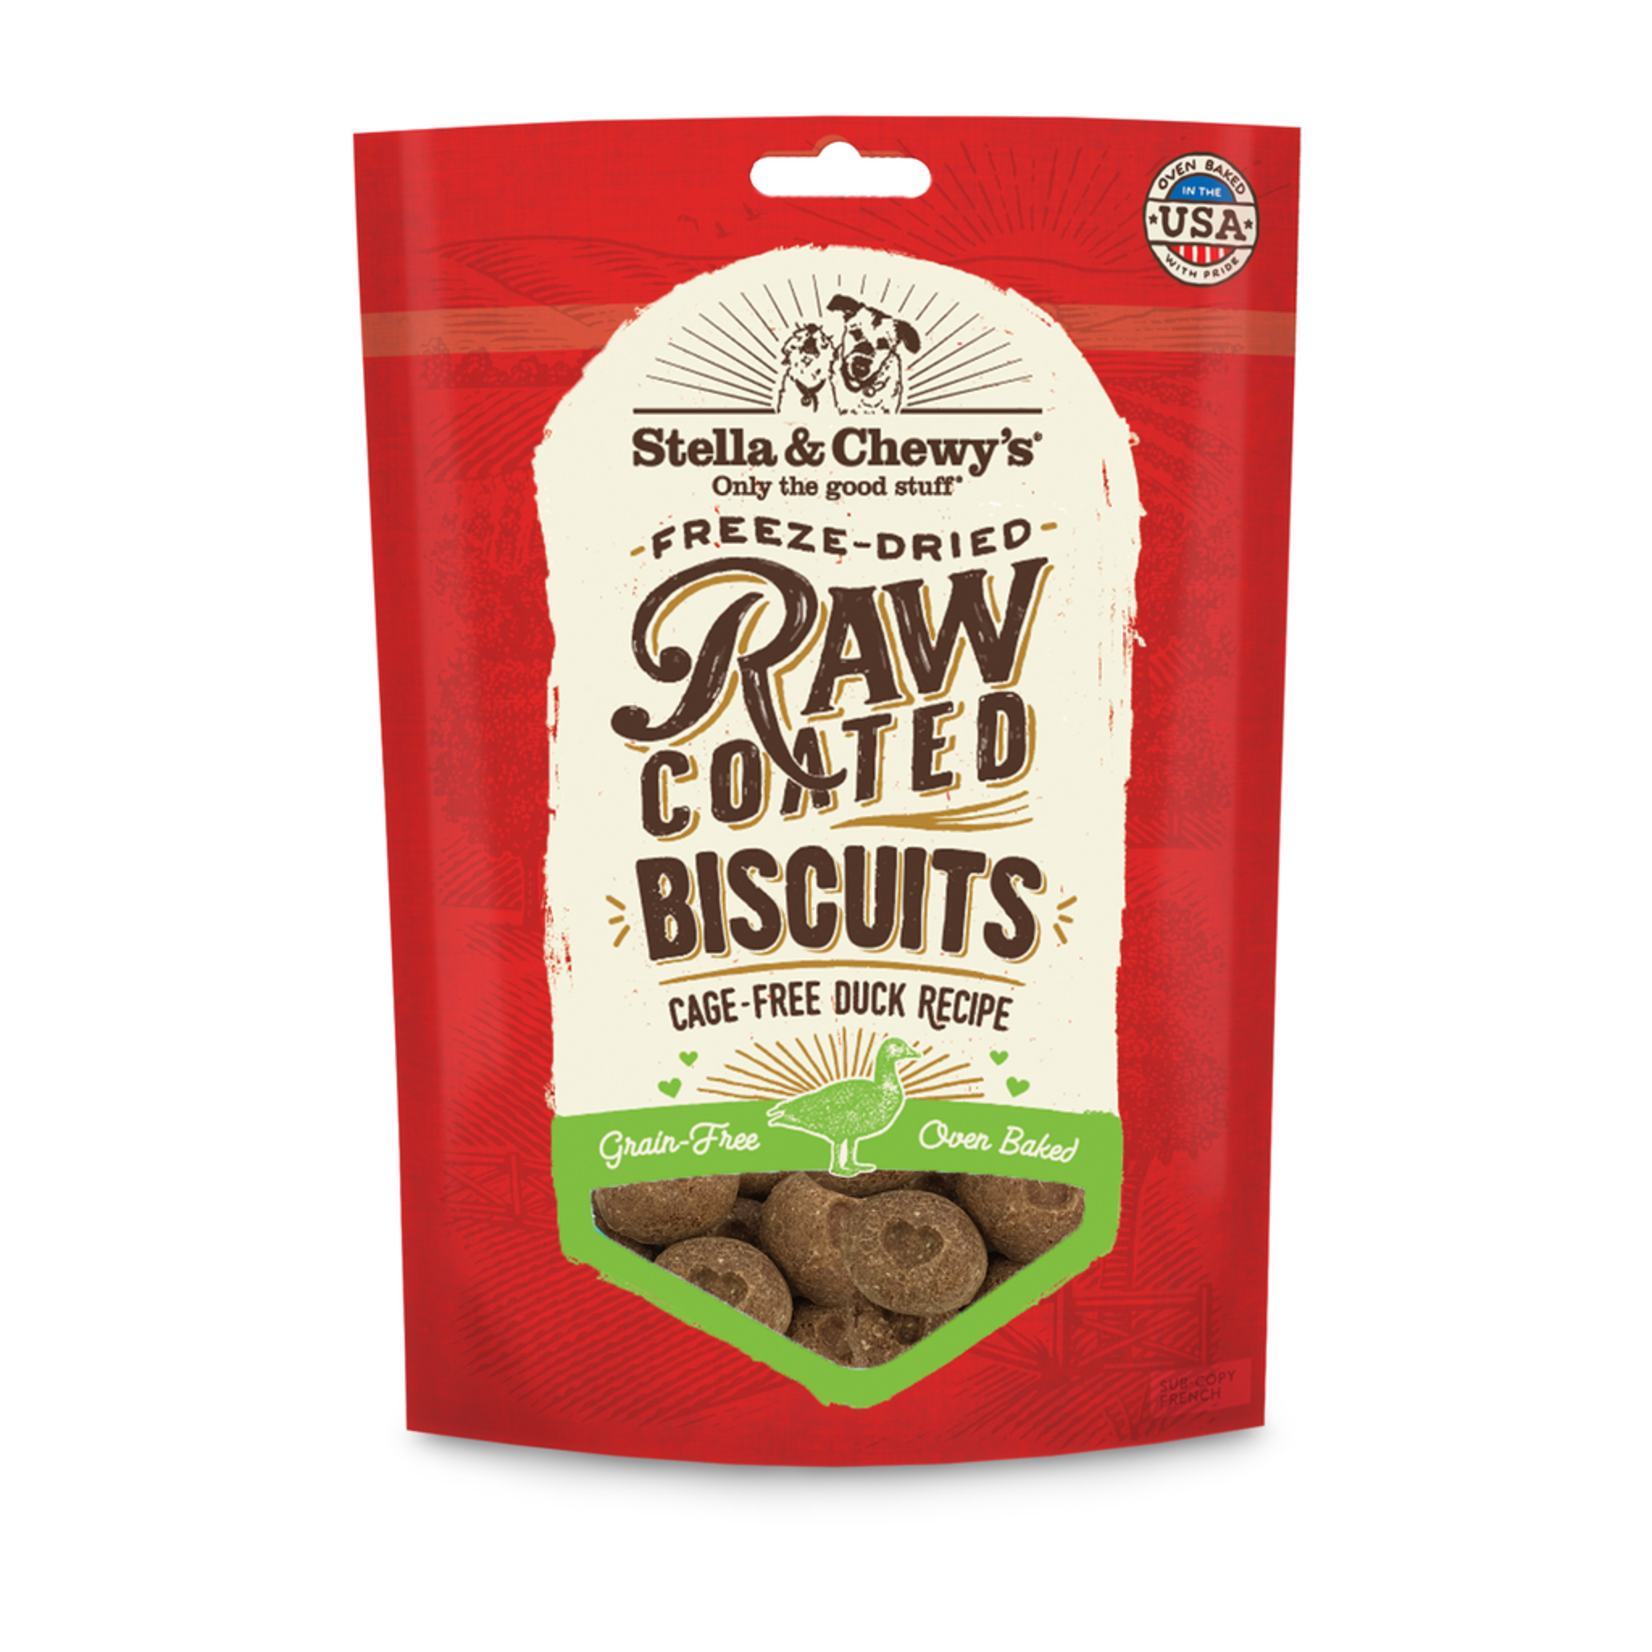 Stella & Chewy's Stella & Chewy’s Raw Coated Baked Biscuits